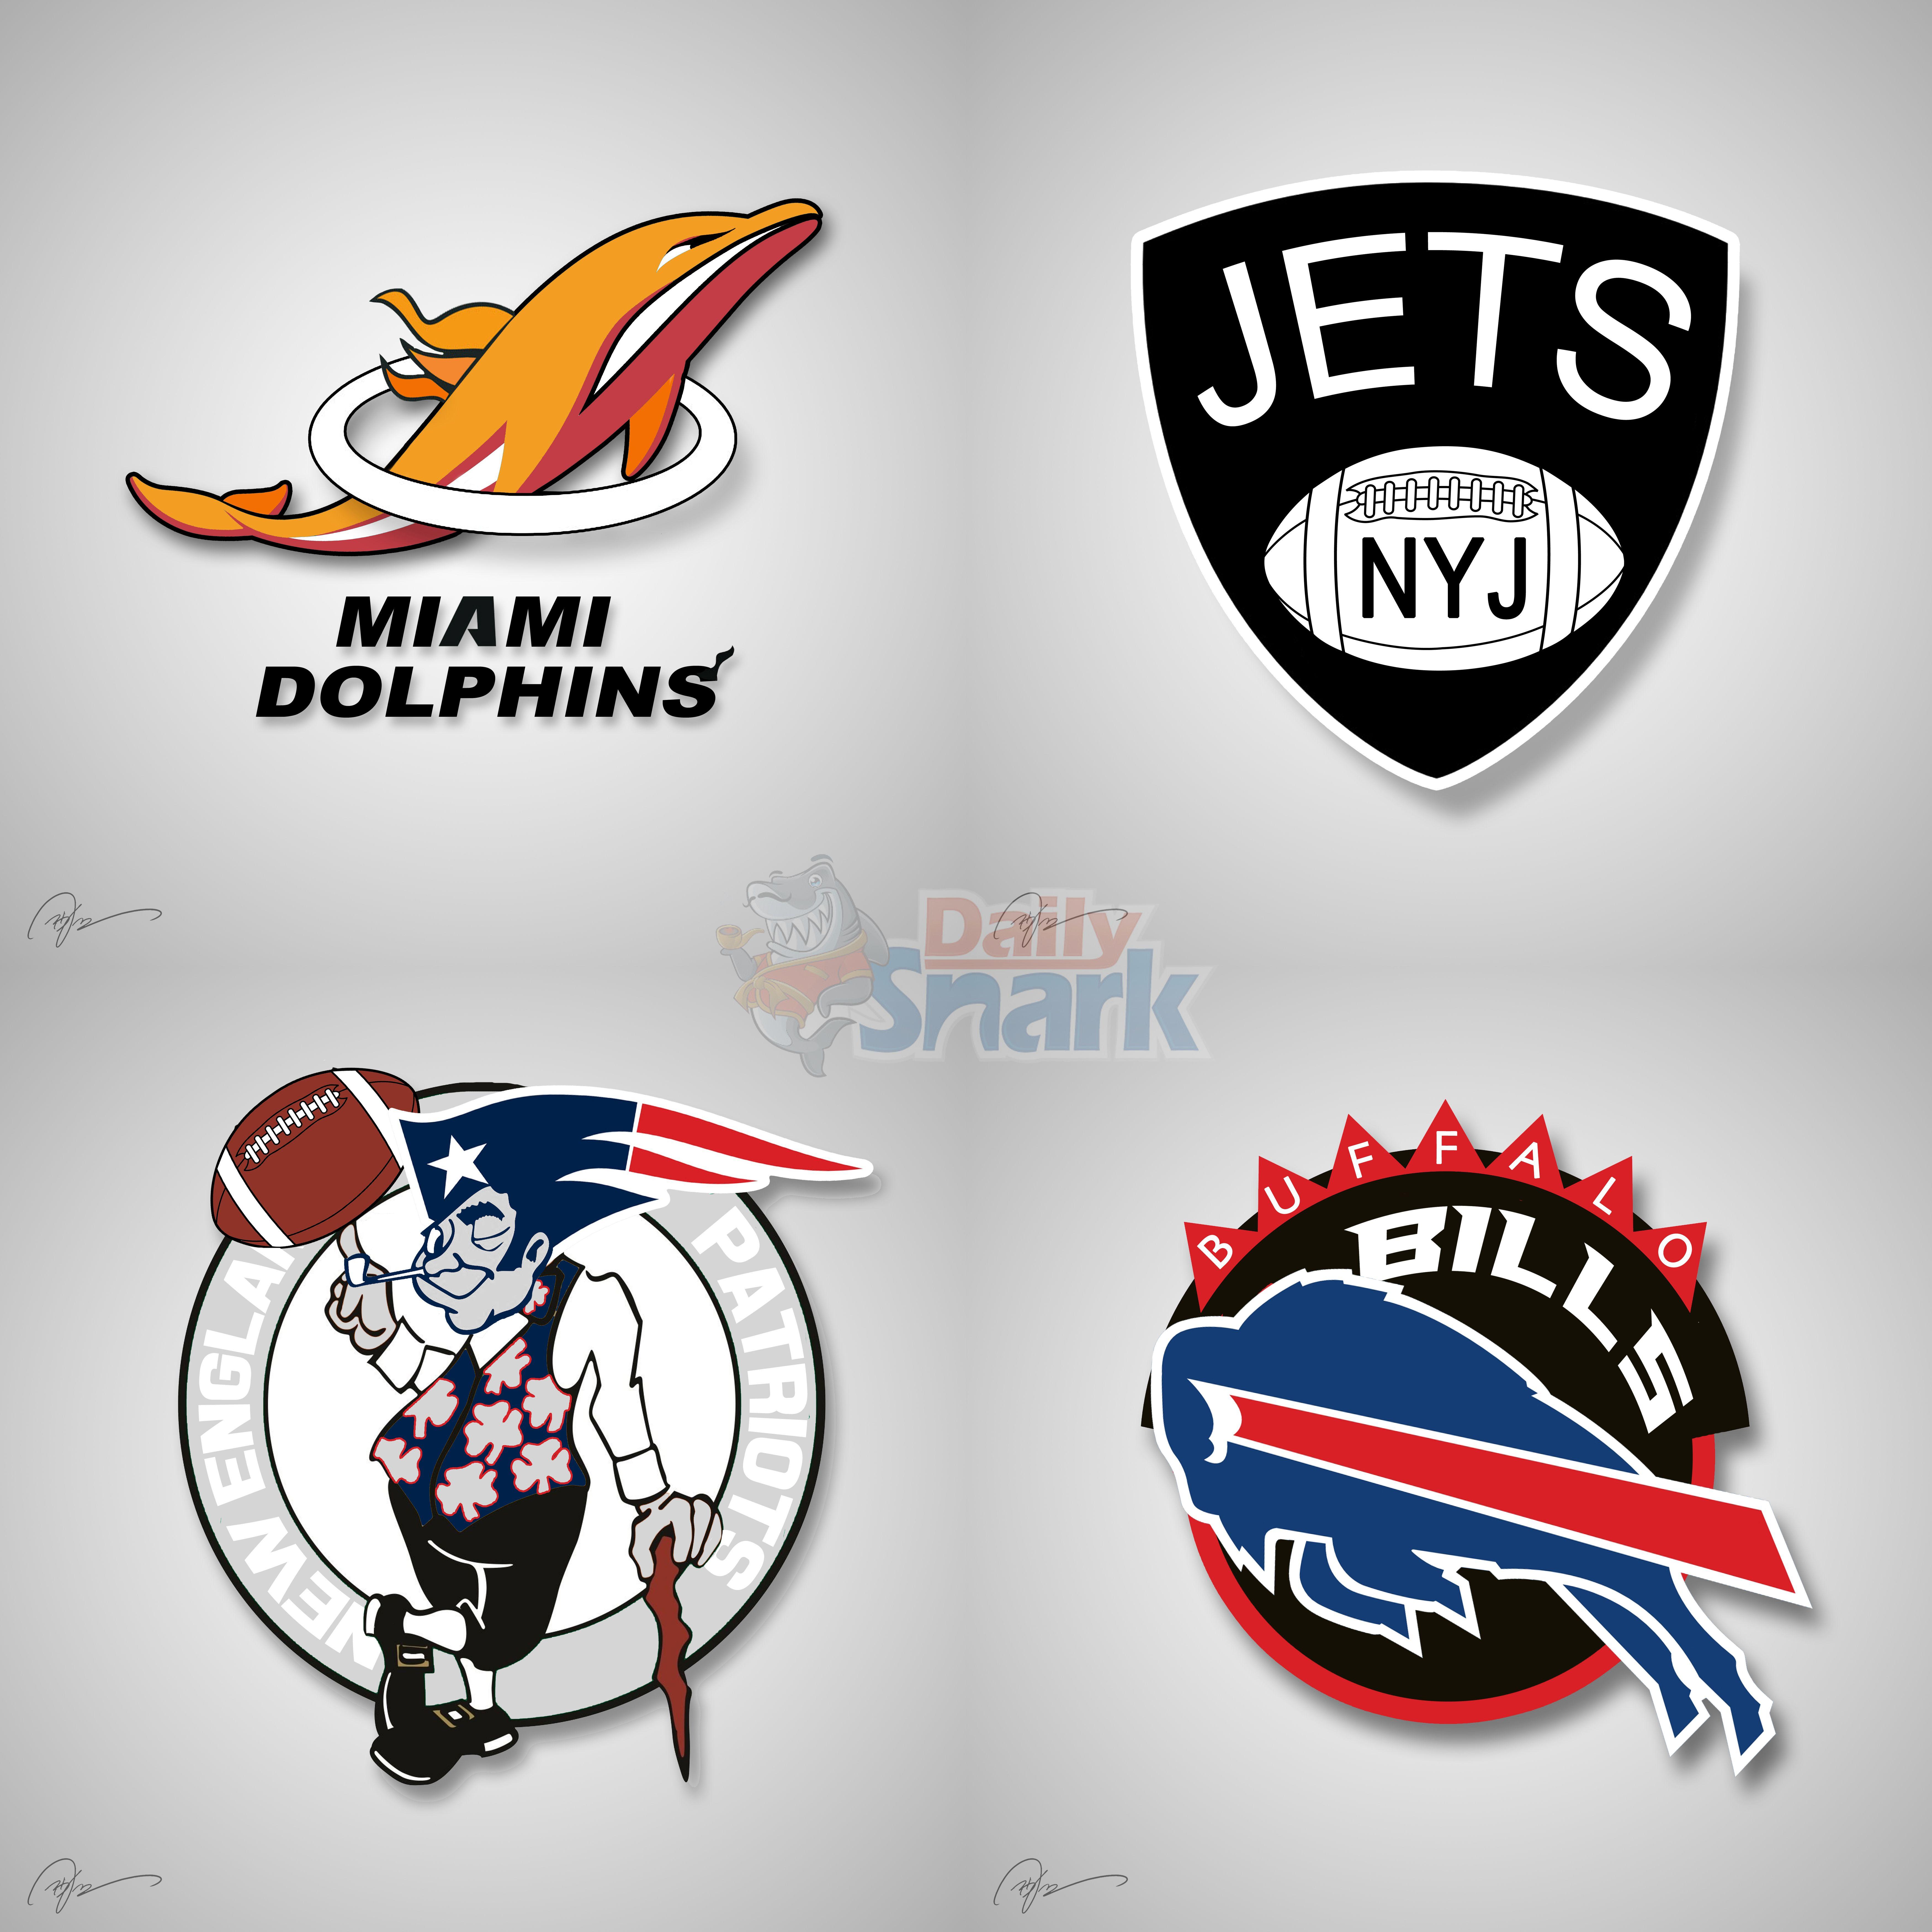 Cool Dolphin Logo - Cool NFL-MLB Logo Combinations 9/23/14 | FOOTBALL FRENZY